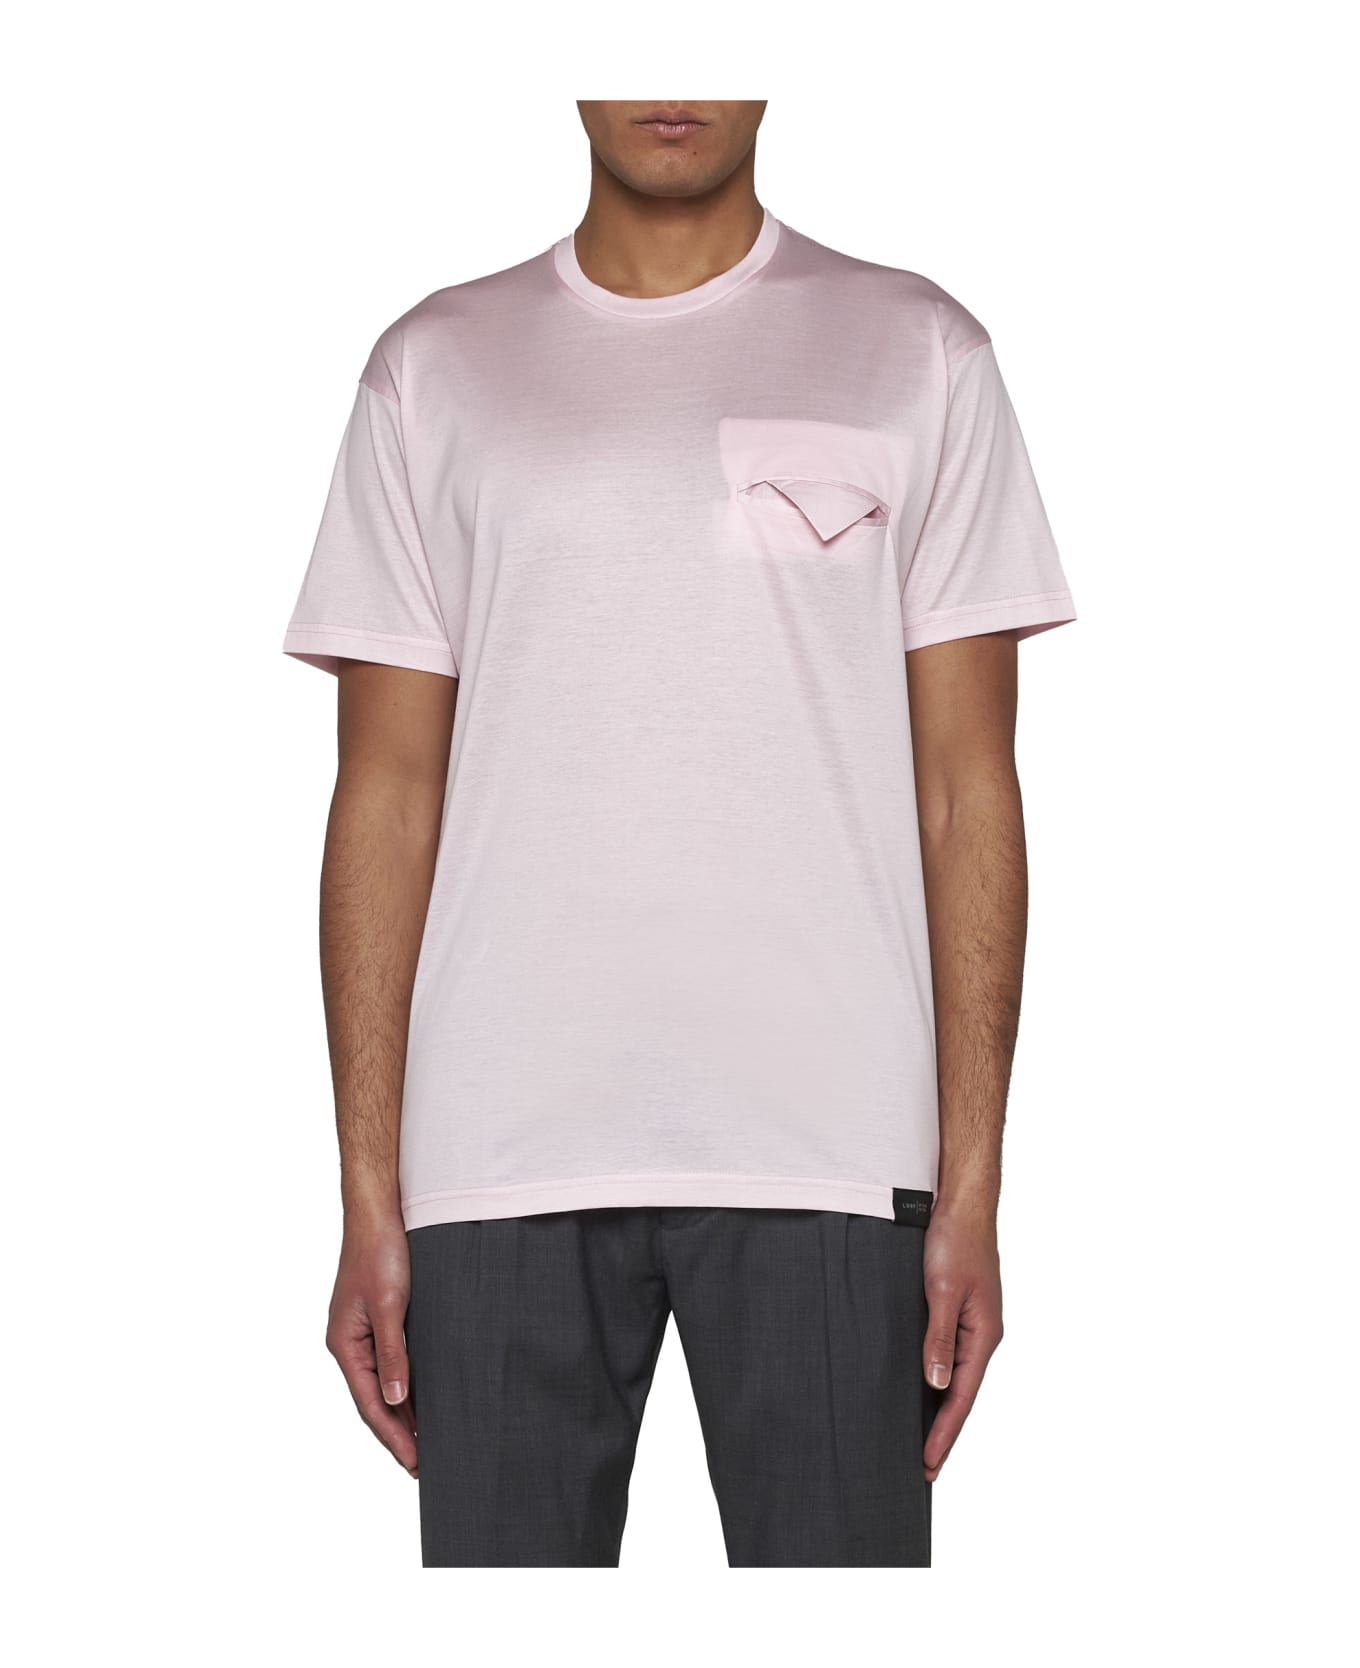 Low Brand T-Shirt - Pink シャツ